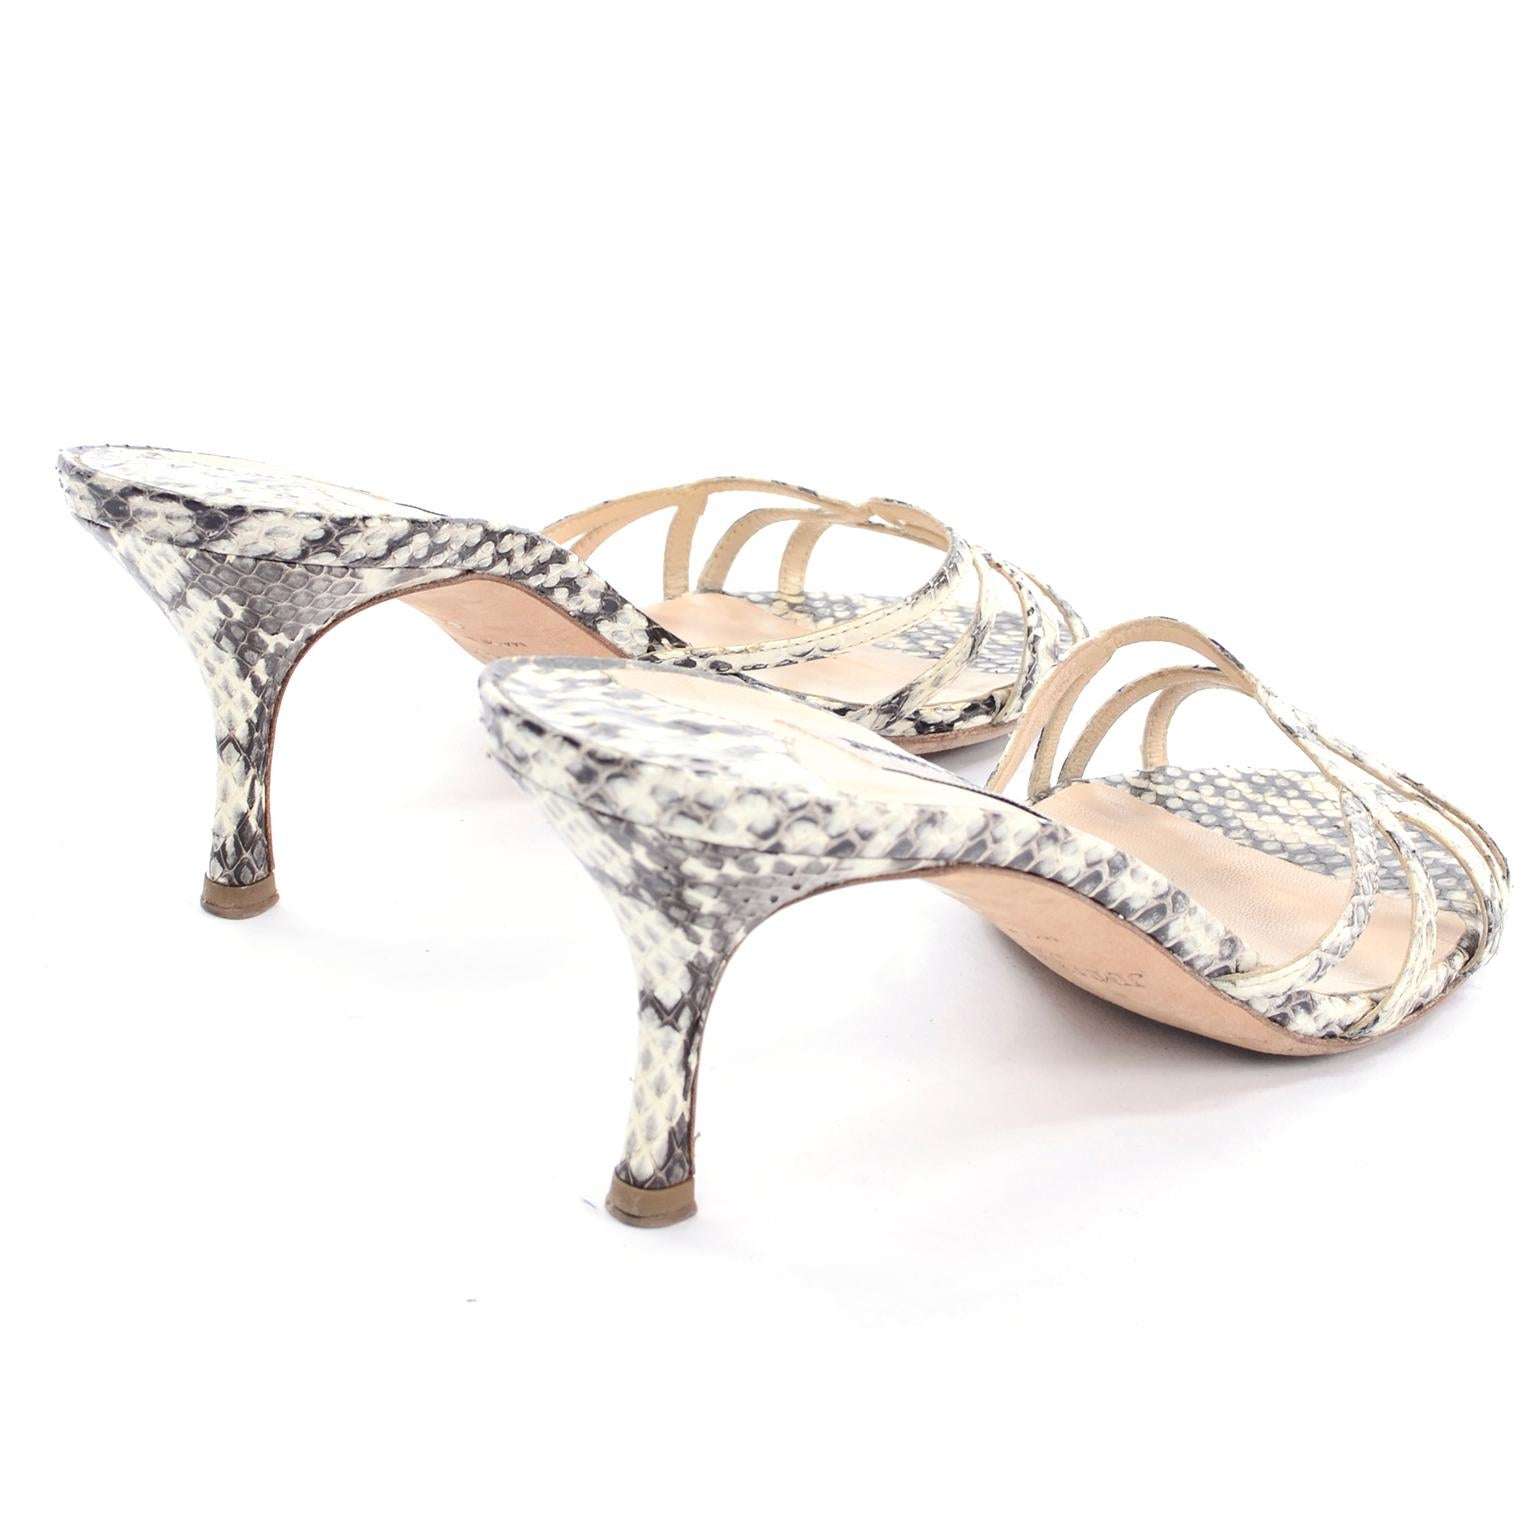 Beige Jimmy Choo Shoes Snakeskin Sandals With 3